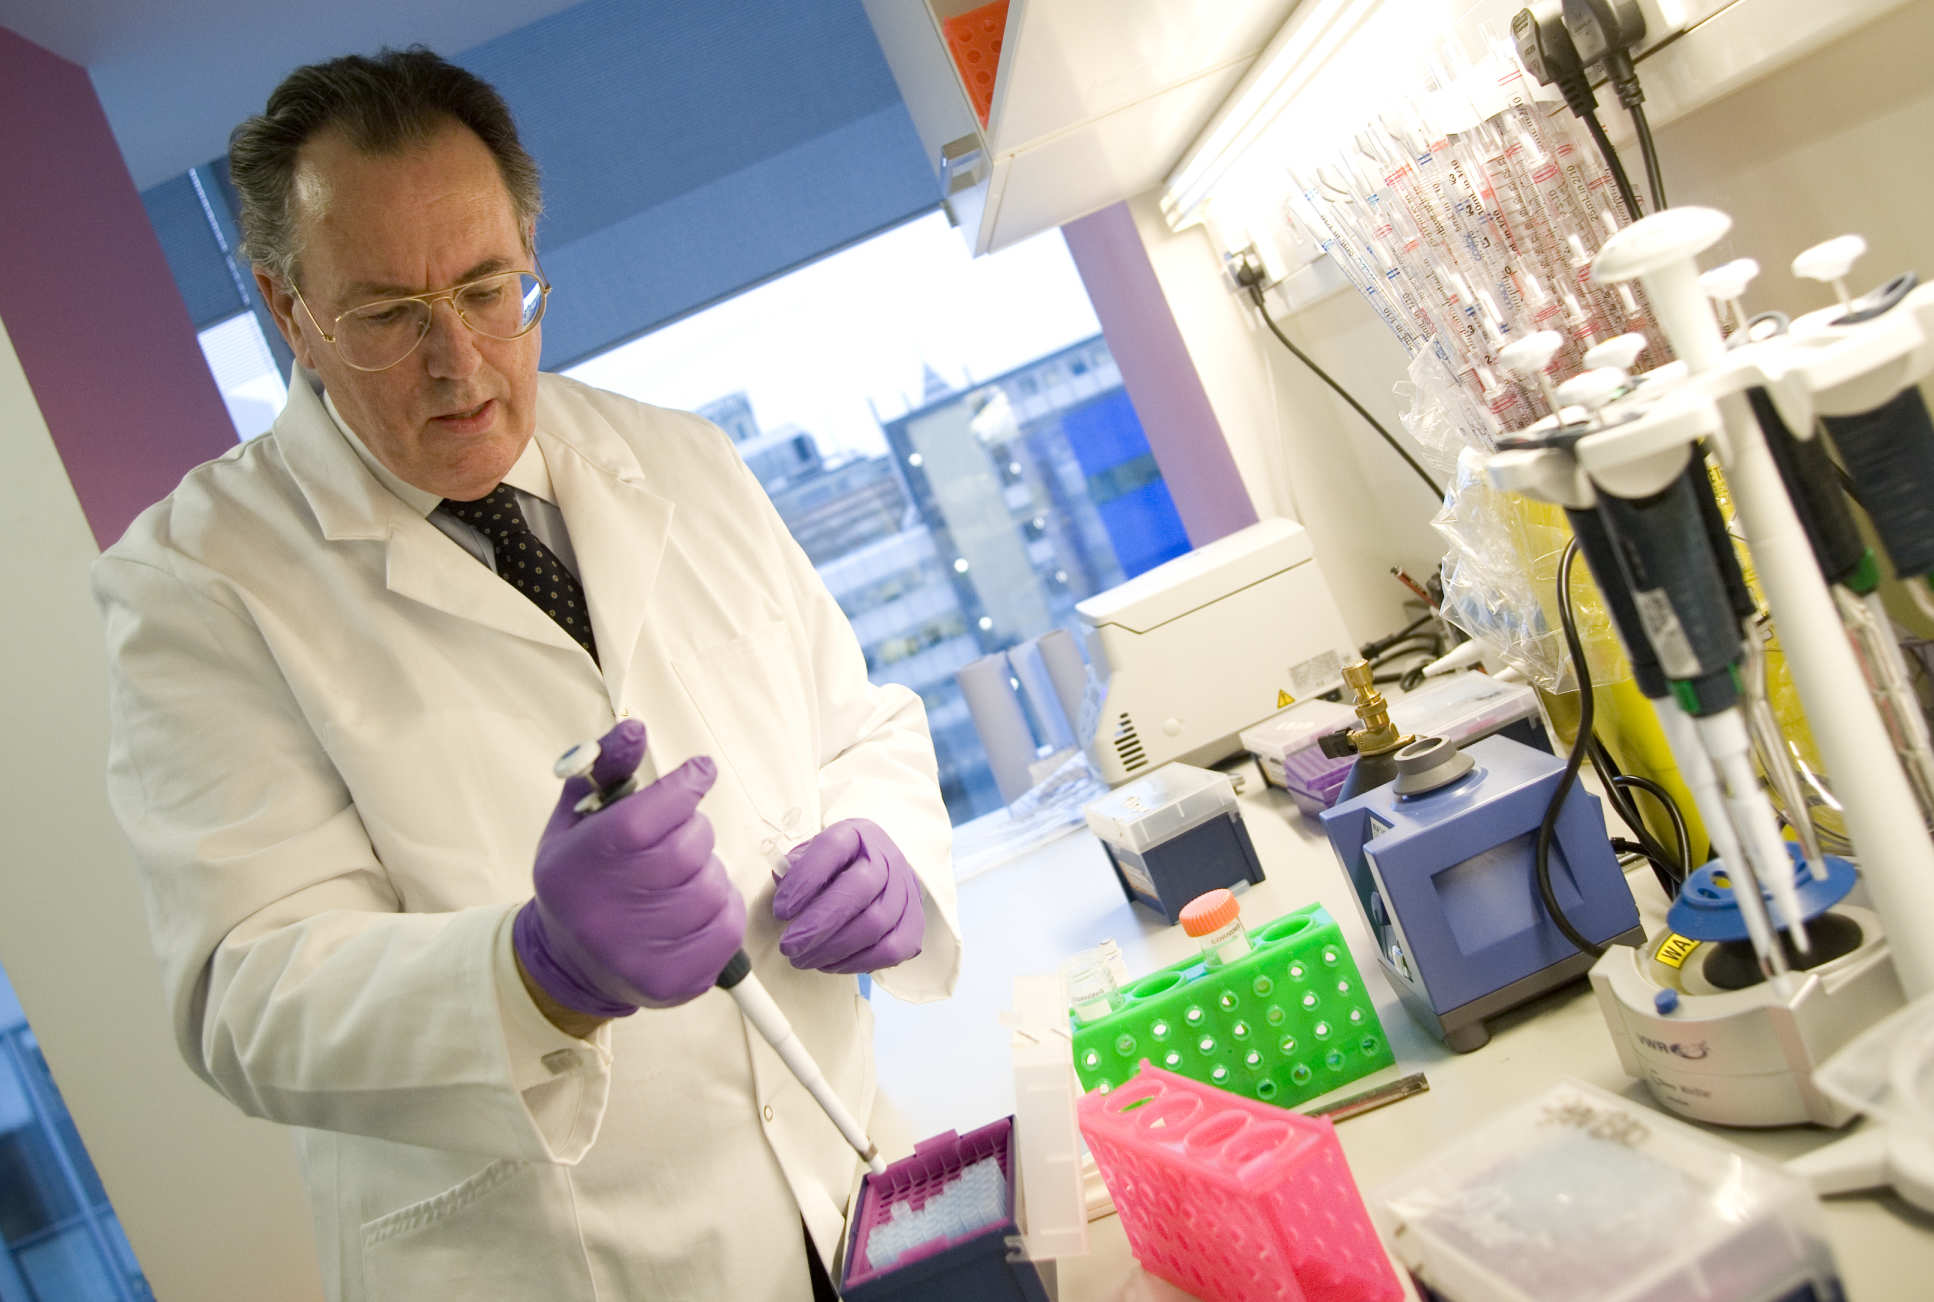 Professor Richard Kitney, Co-Director of the UK Innovation and Knowledge Centre for Synthetic Biology